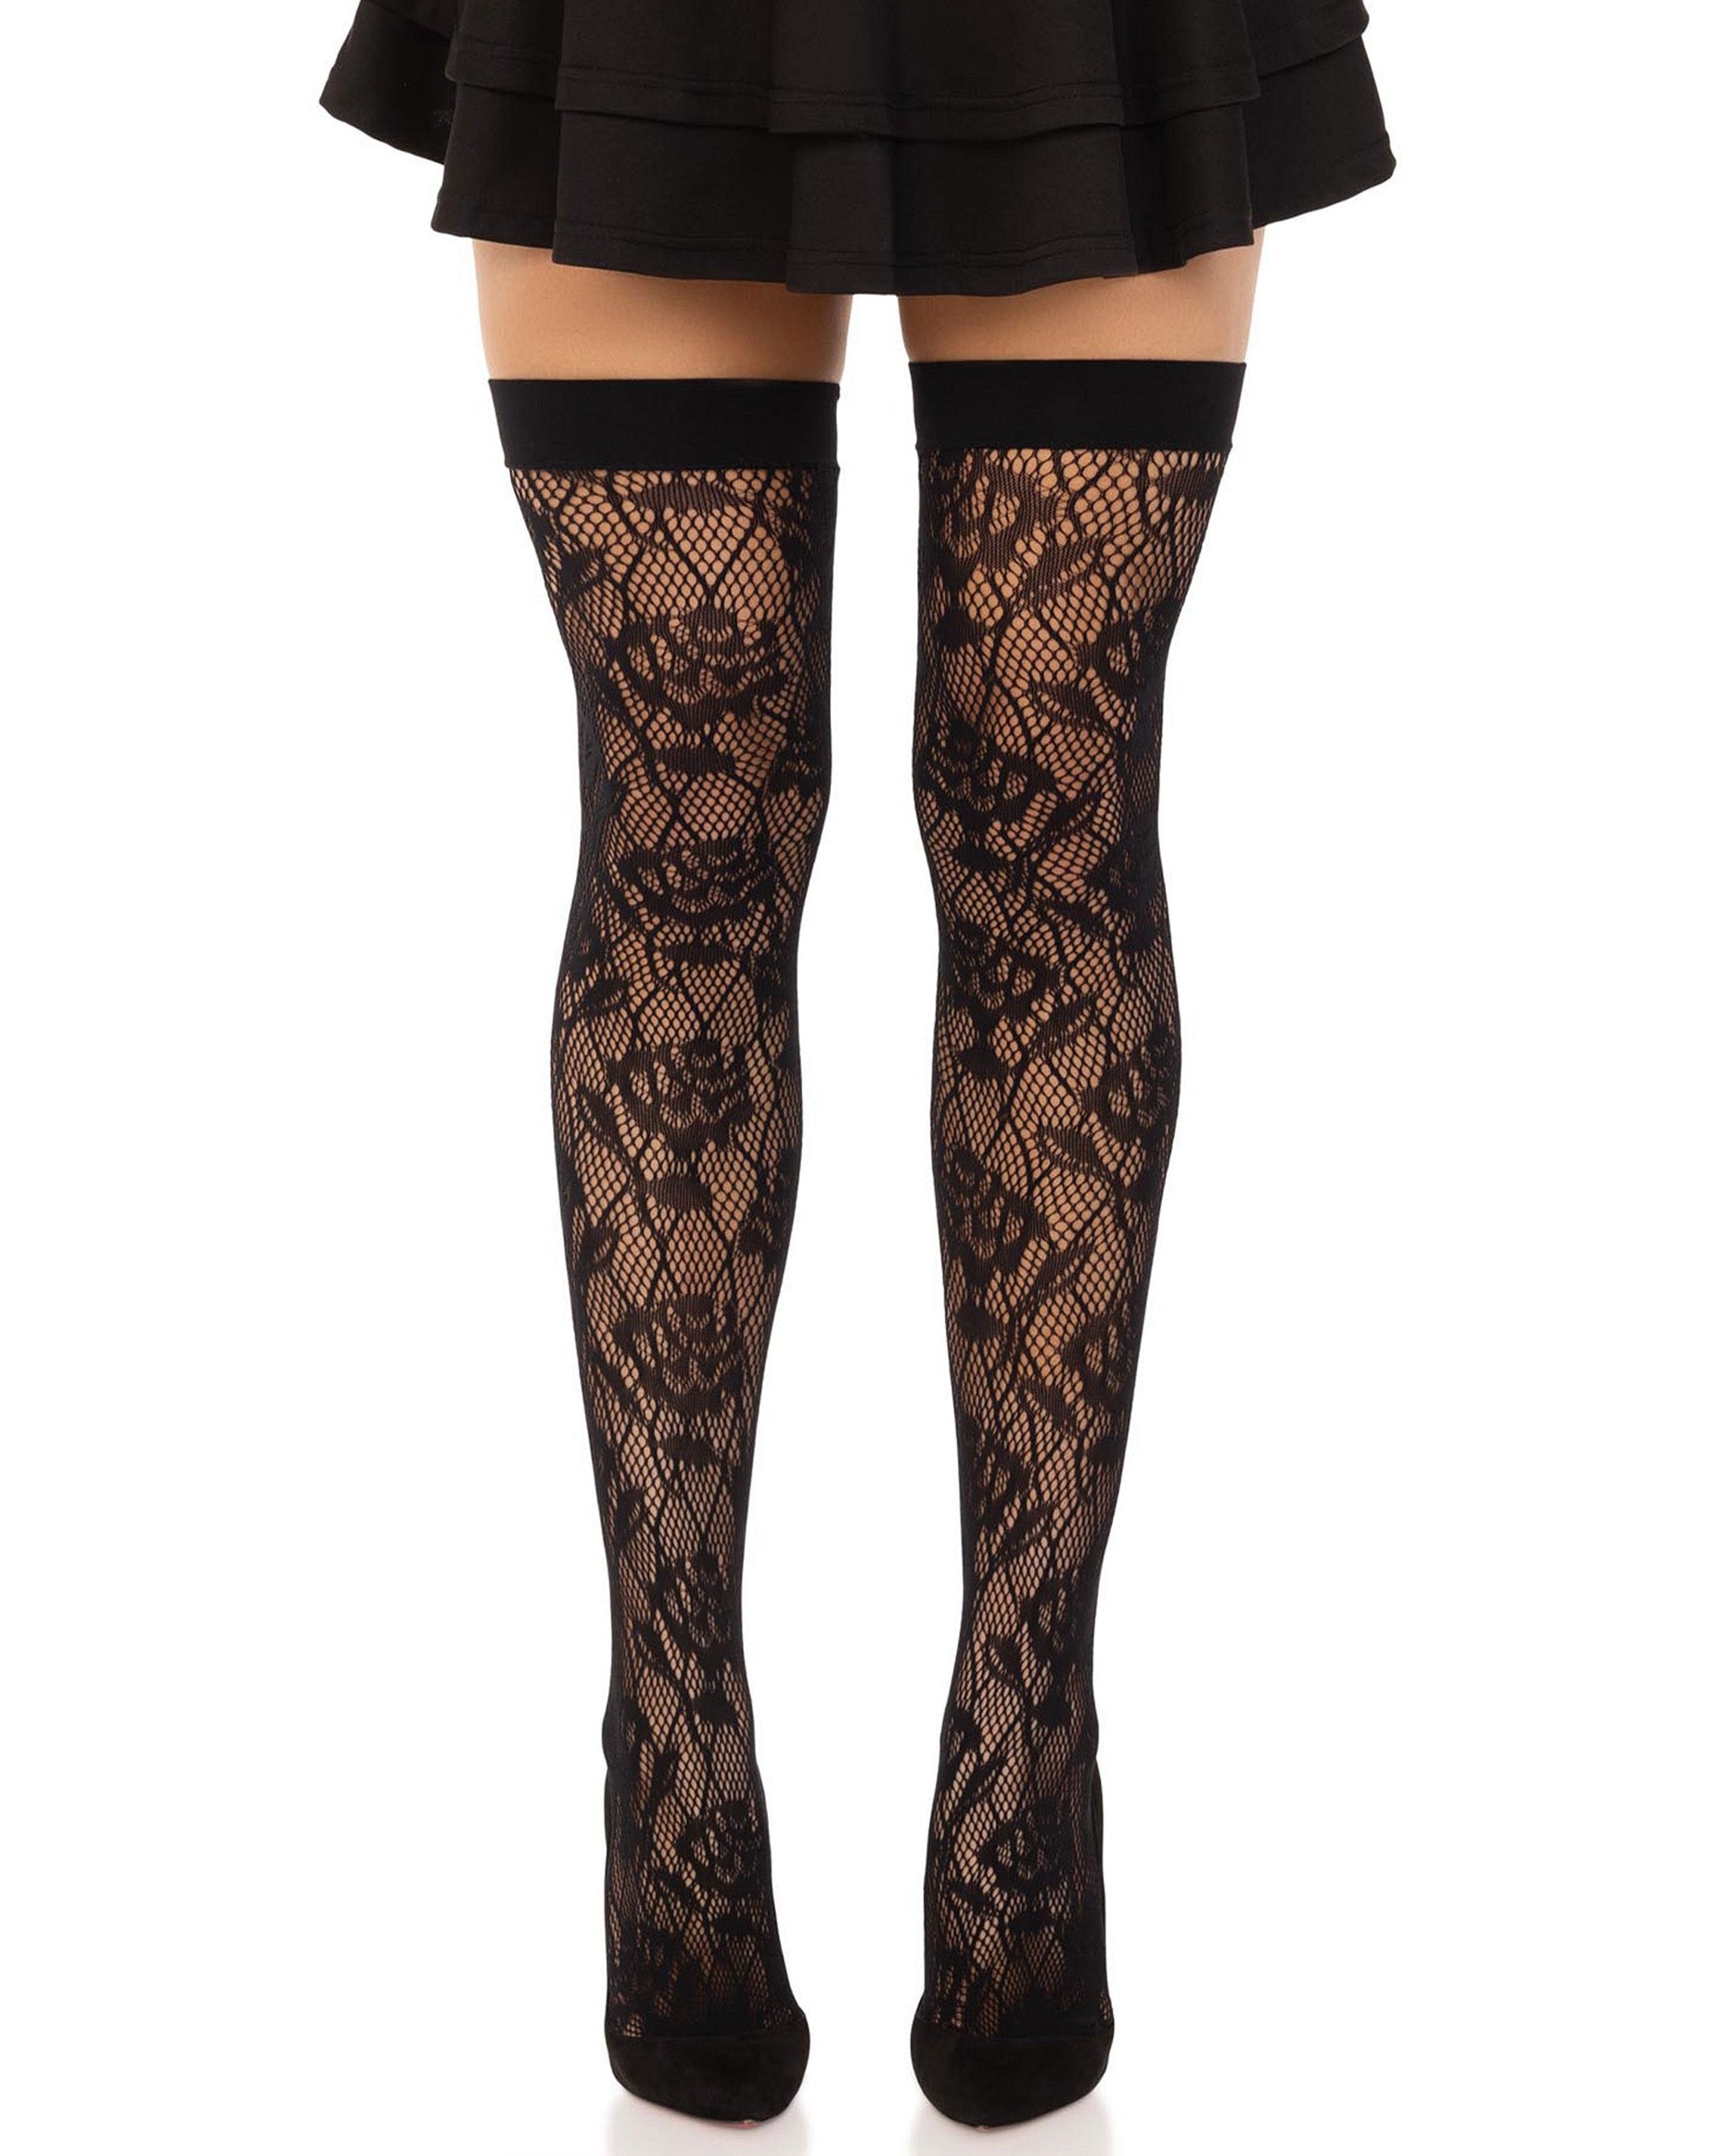 Leg Avenue 6216 Wild Rose Net Thigh Highs - Black openwork thigh high socks with a floral pattern and deep elasticated cuff. Can be worn with a suspender belt / leg garters.